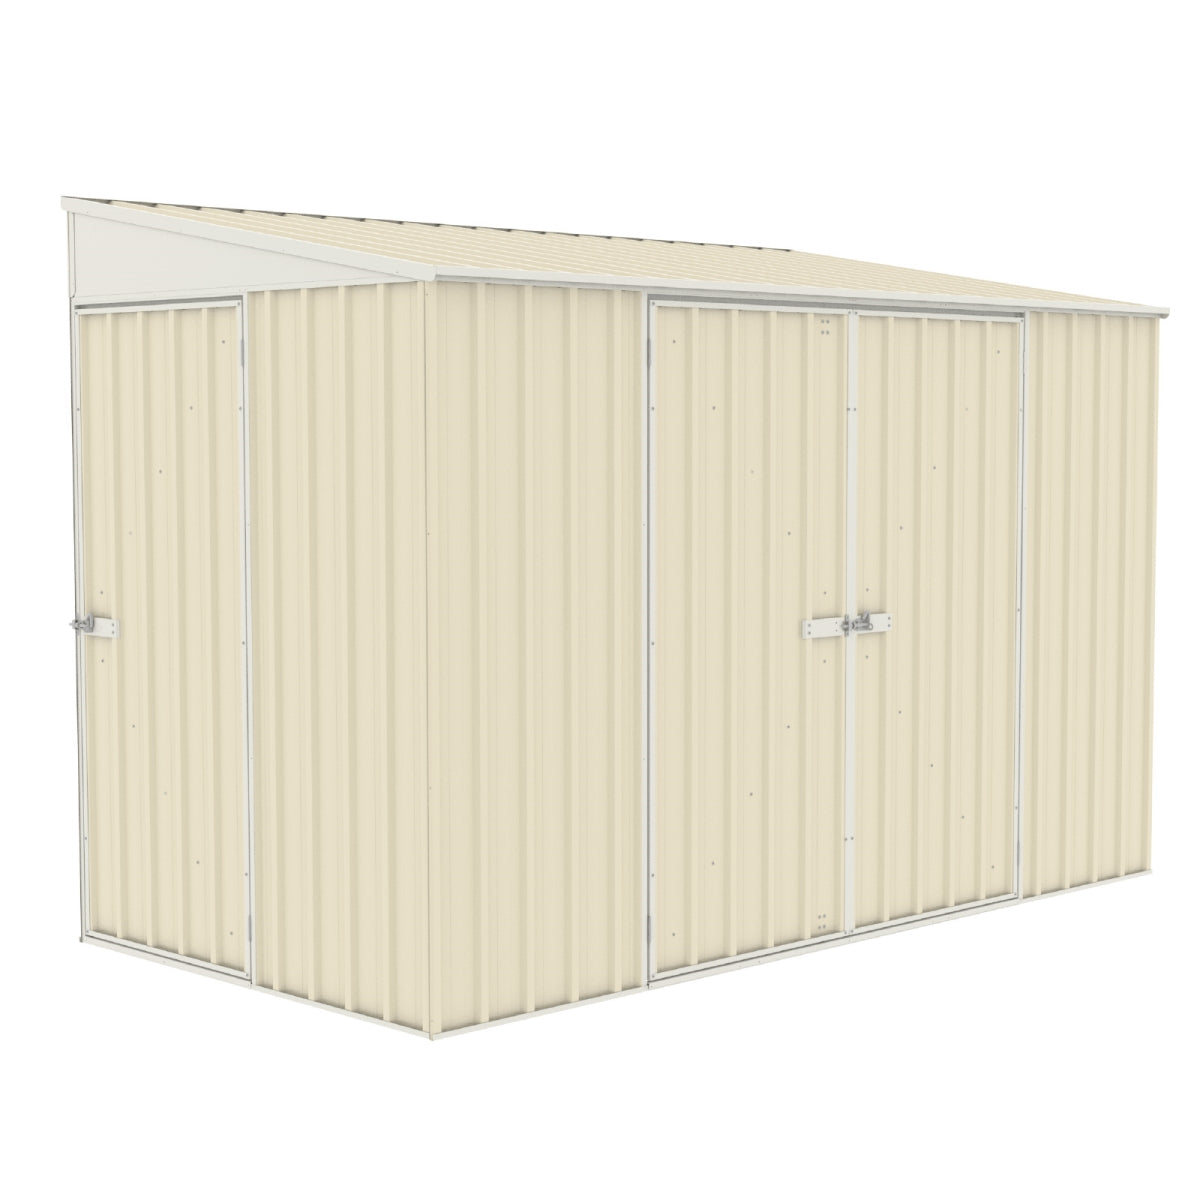 Absco | 10x5 ft Lean To Metal Bike Shed